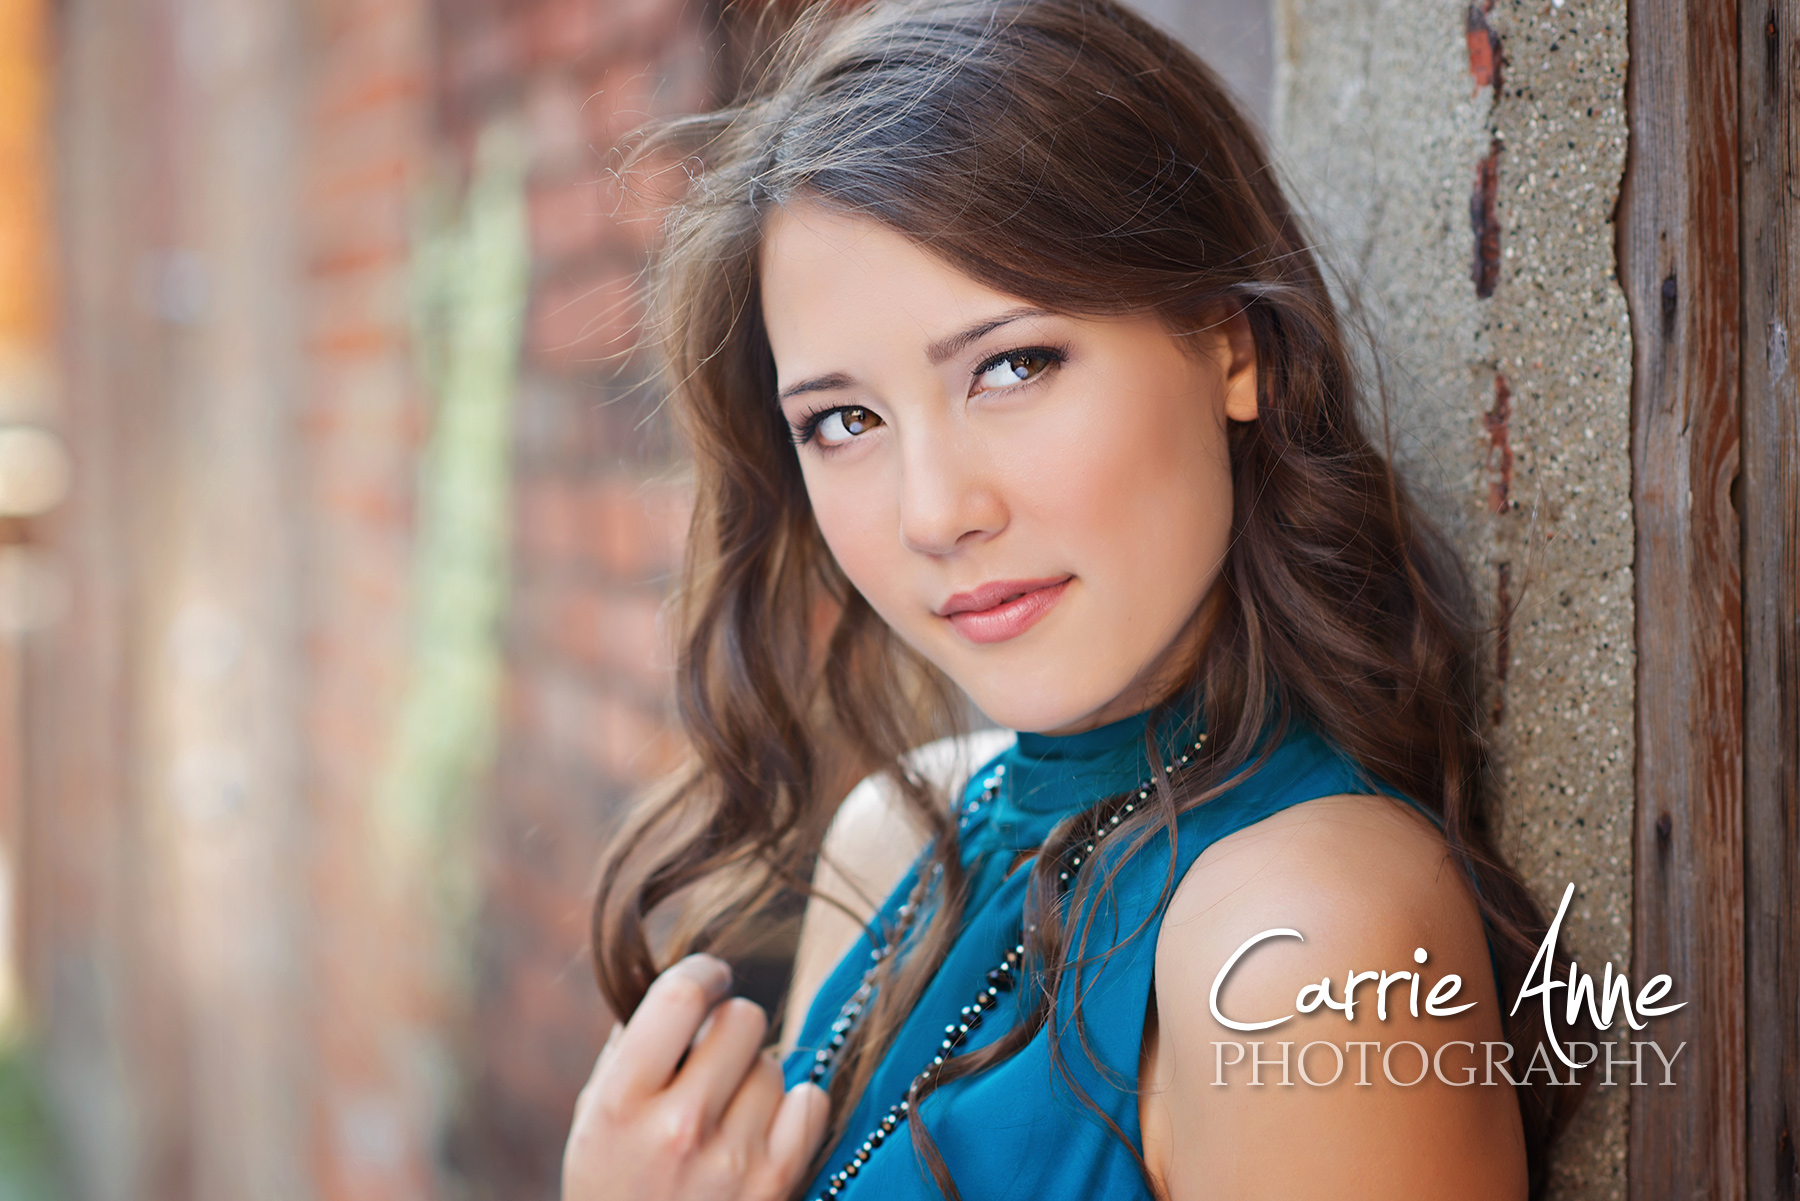 Best West Michigan Senior Pictures : Carrie Anne Photography